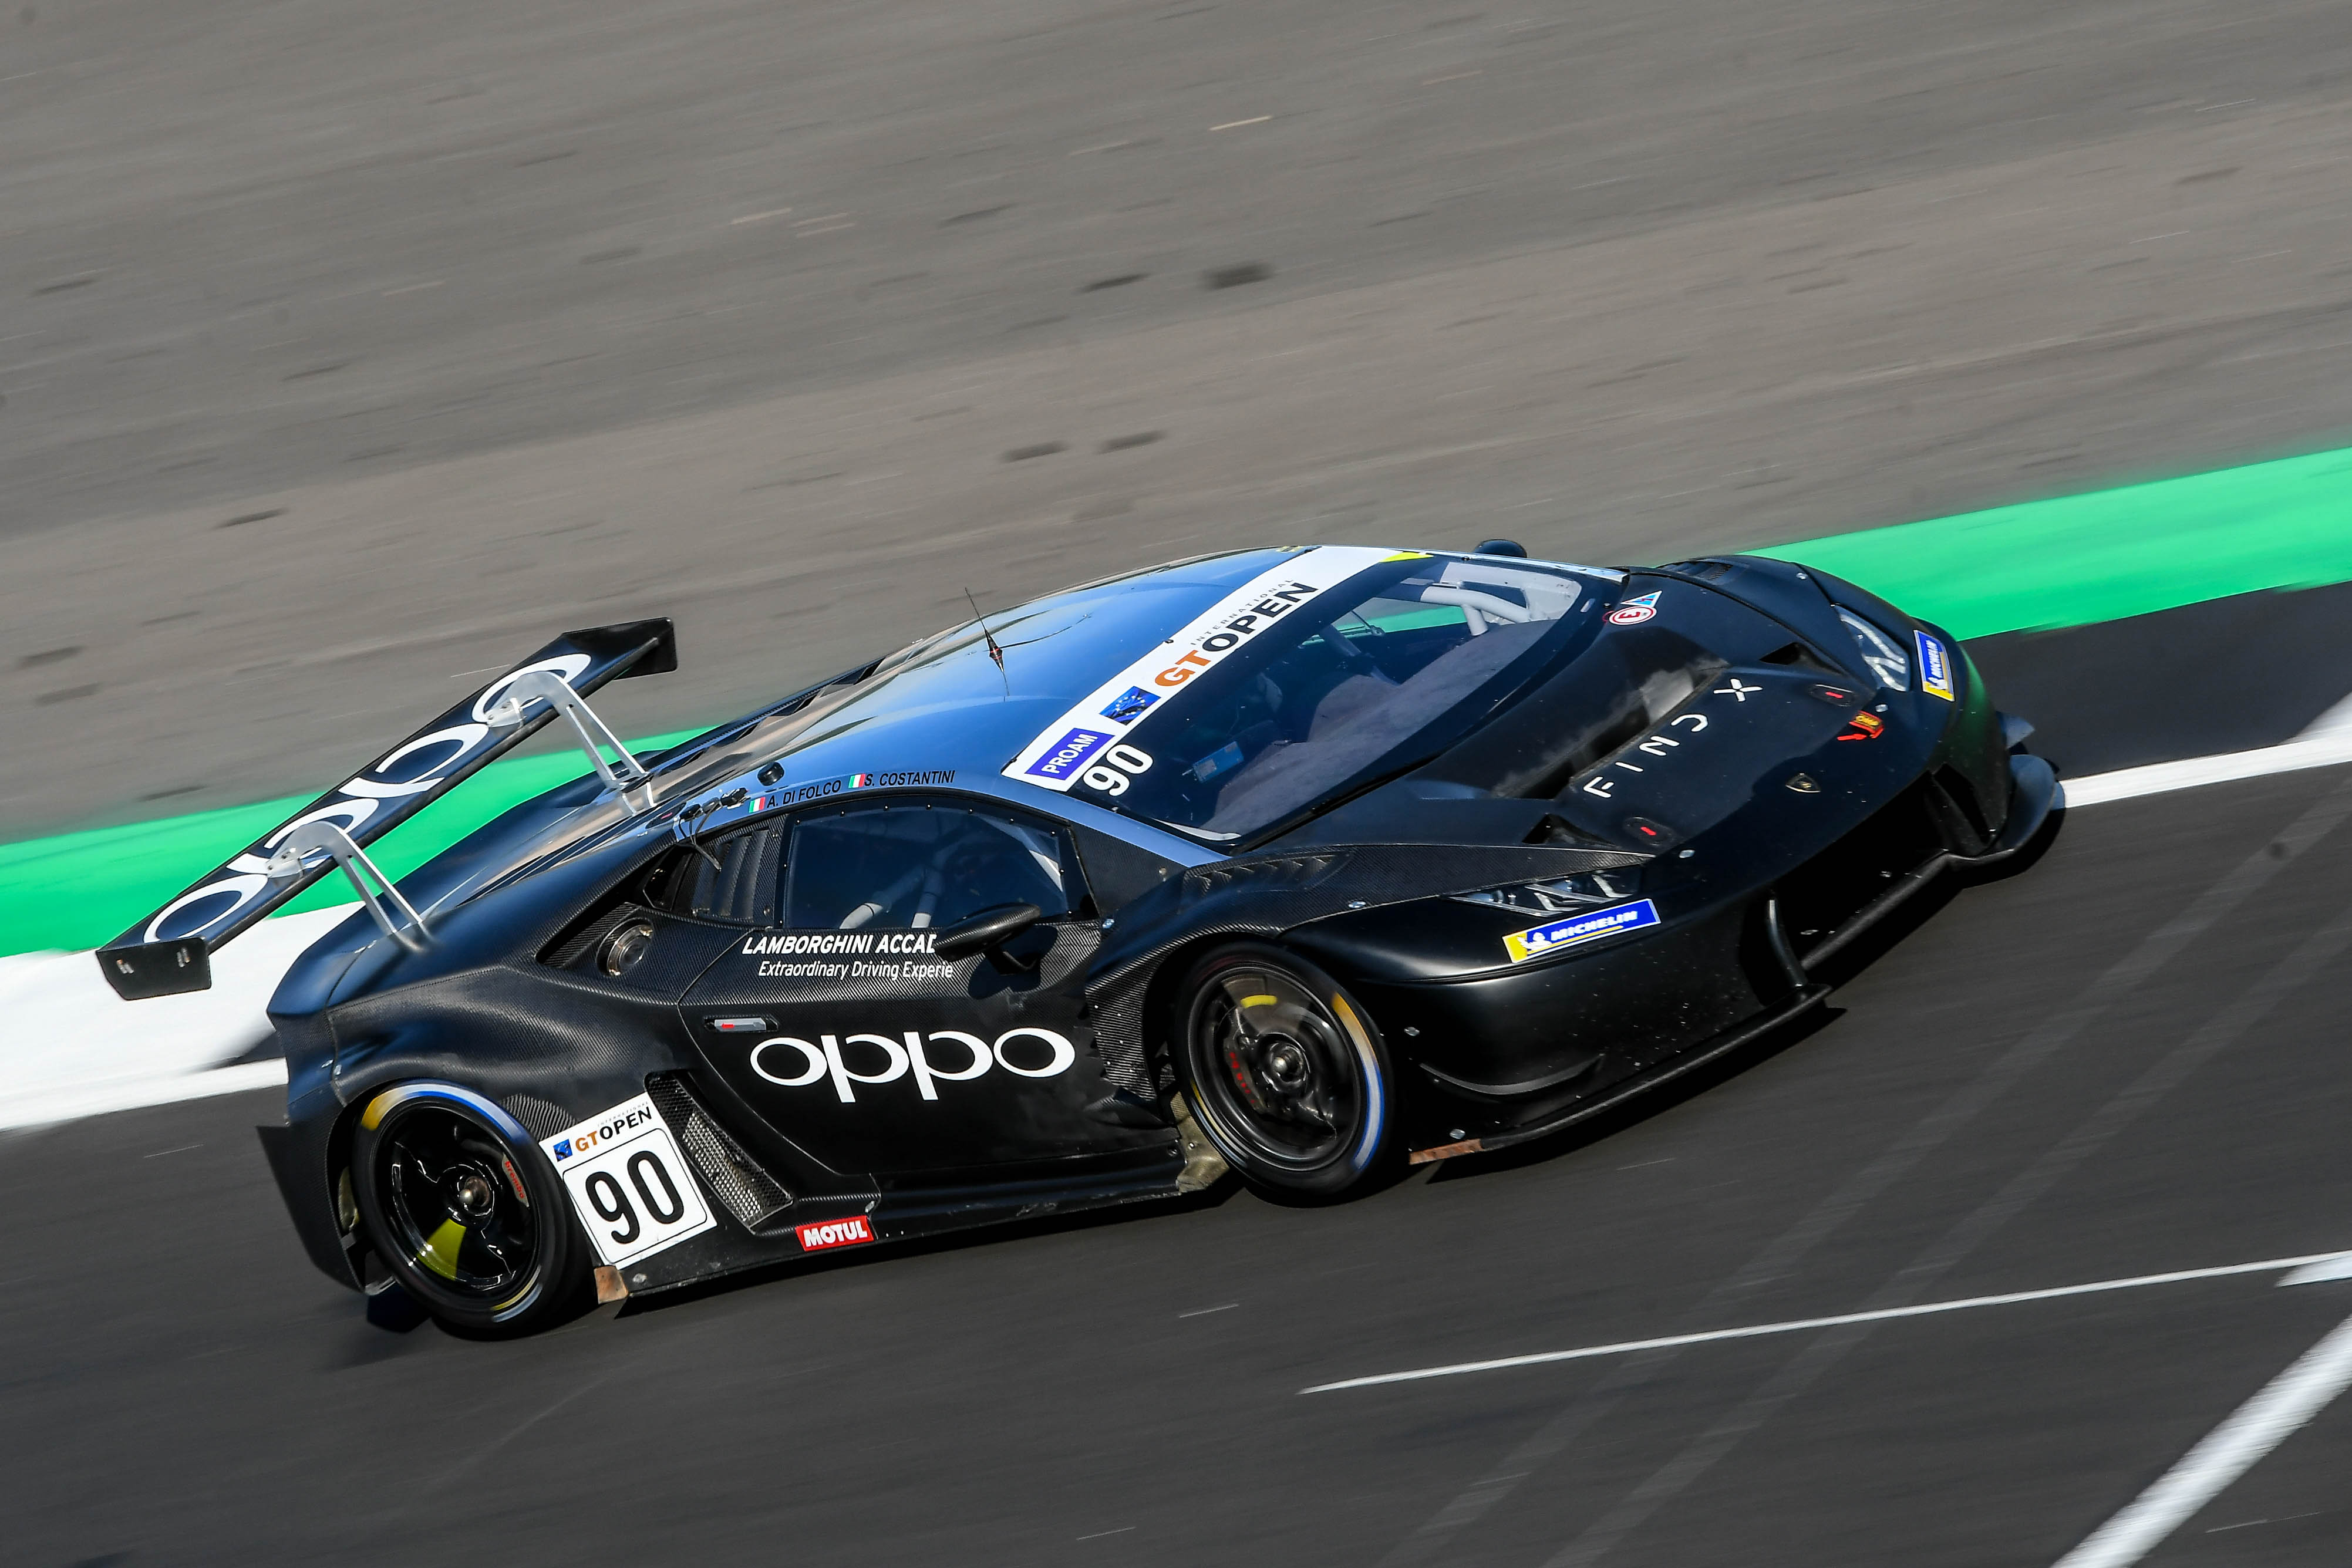 Target Racing secures second consecutive podium of the season at Silverstone